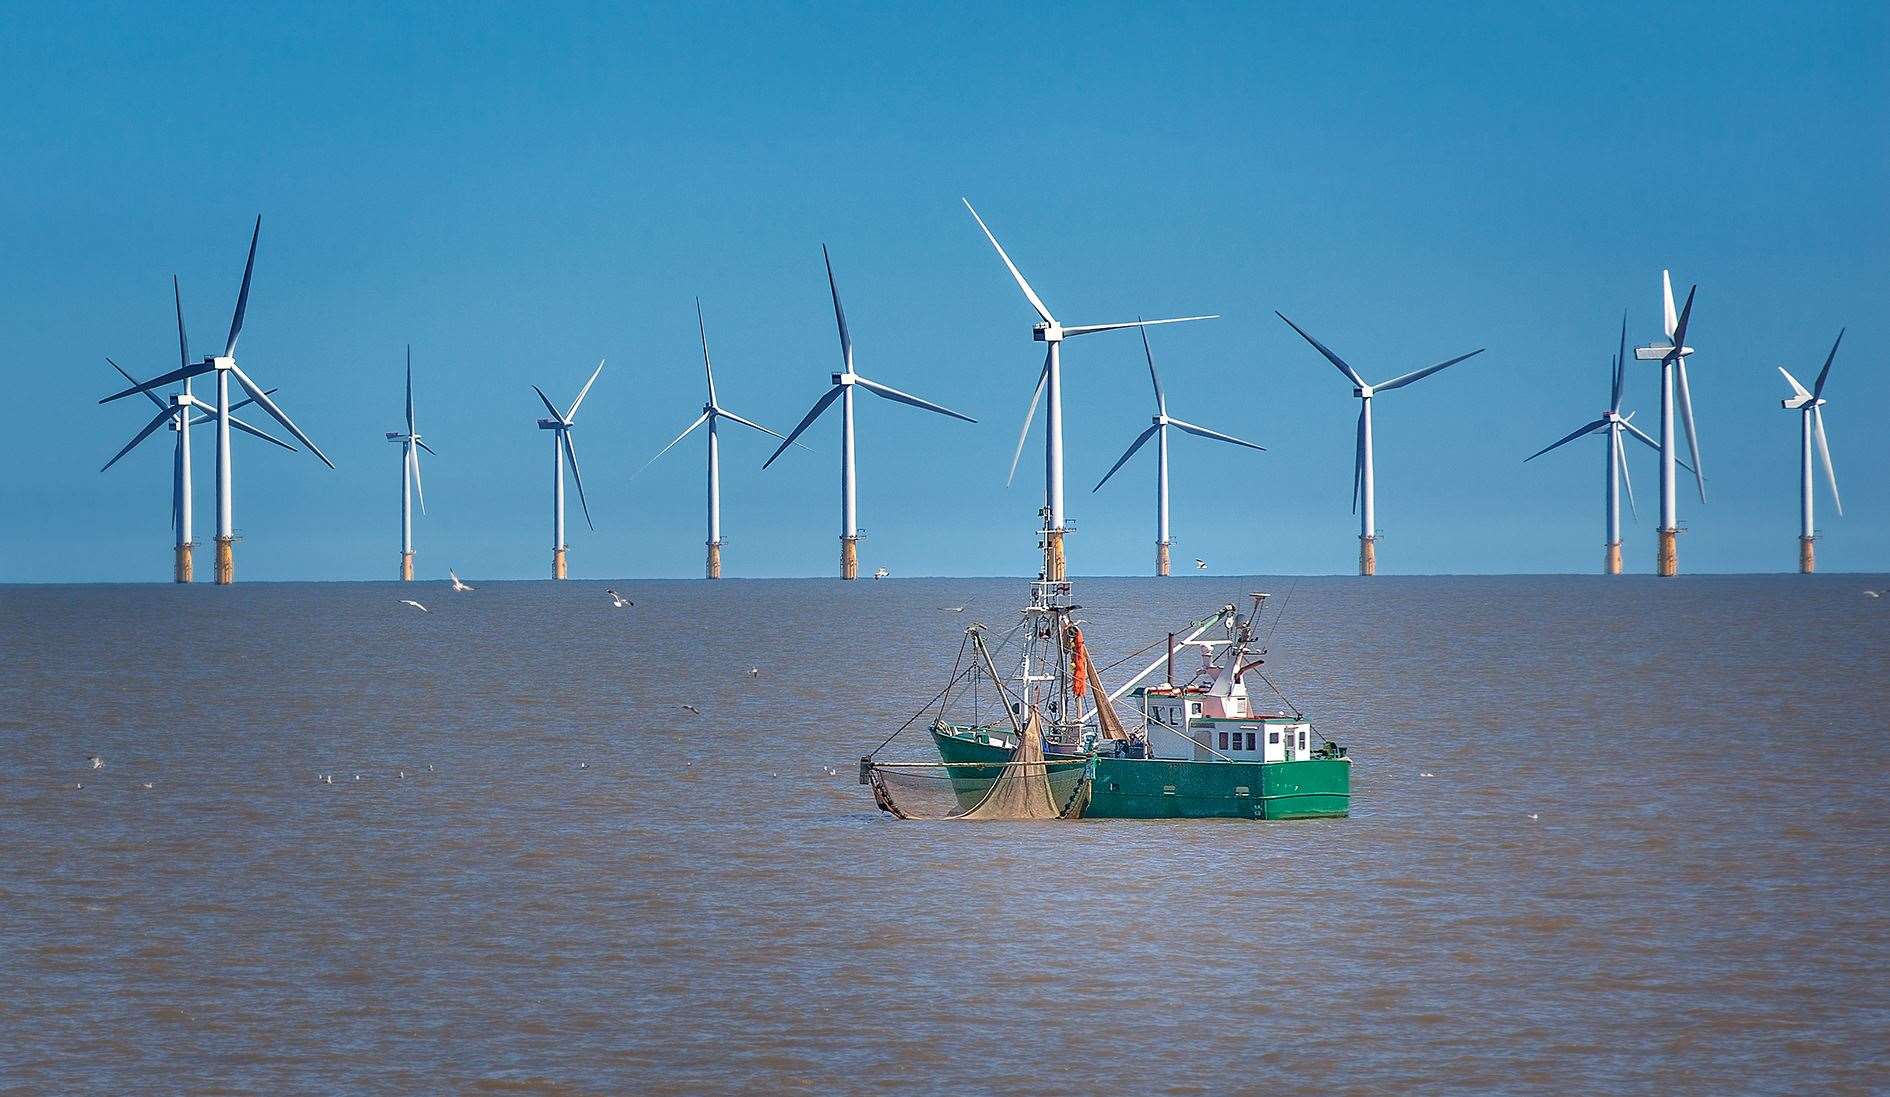 Concerns have been raised about the impact of offshore windfarms on the fishing industry.